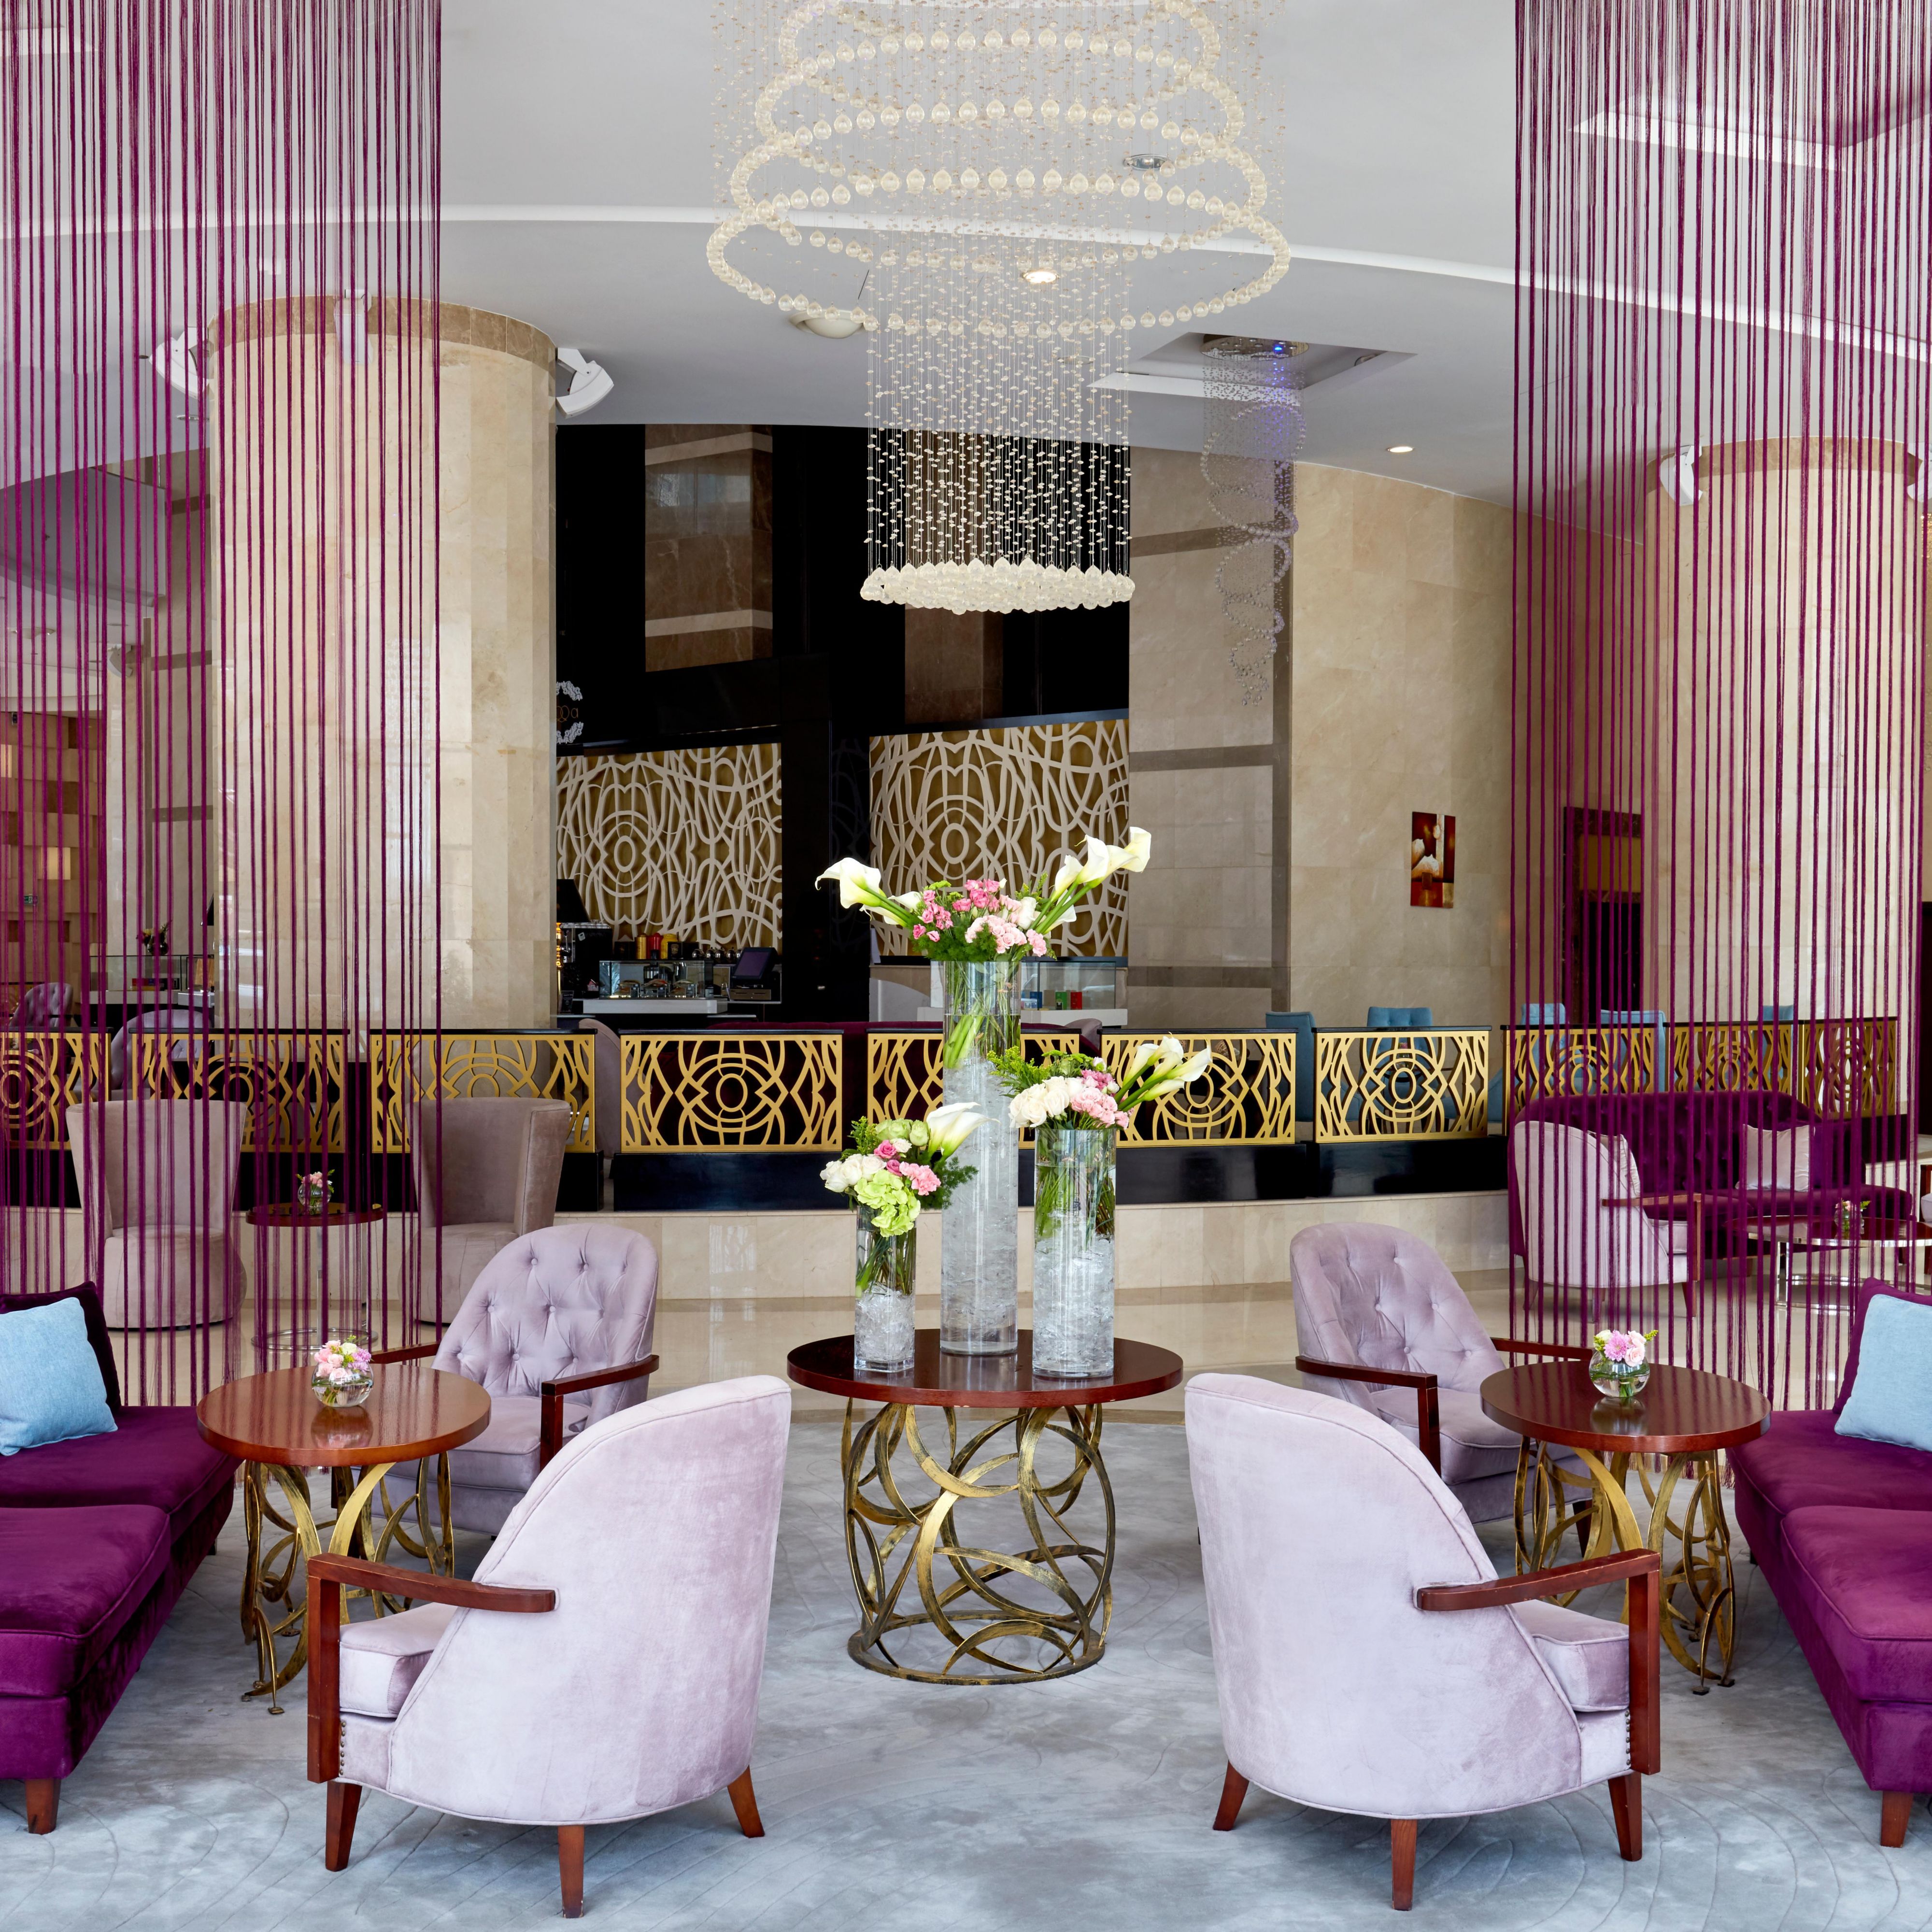 The hotel lobby depicts a stylish and modern elegance